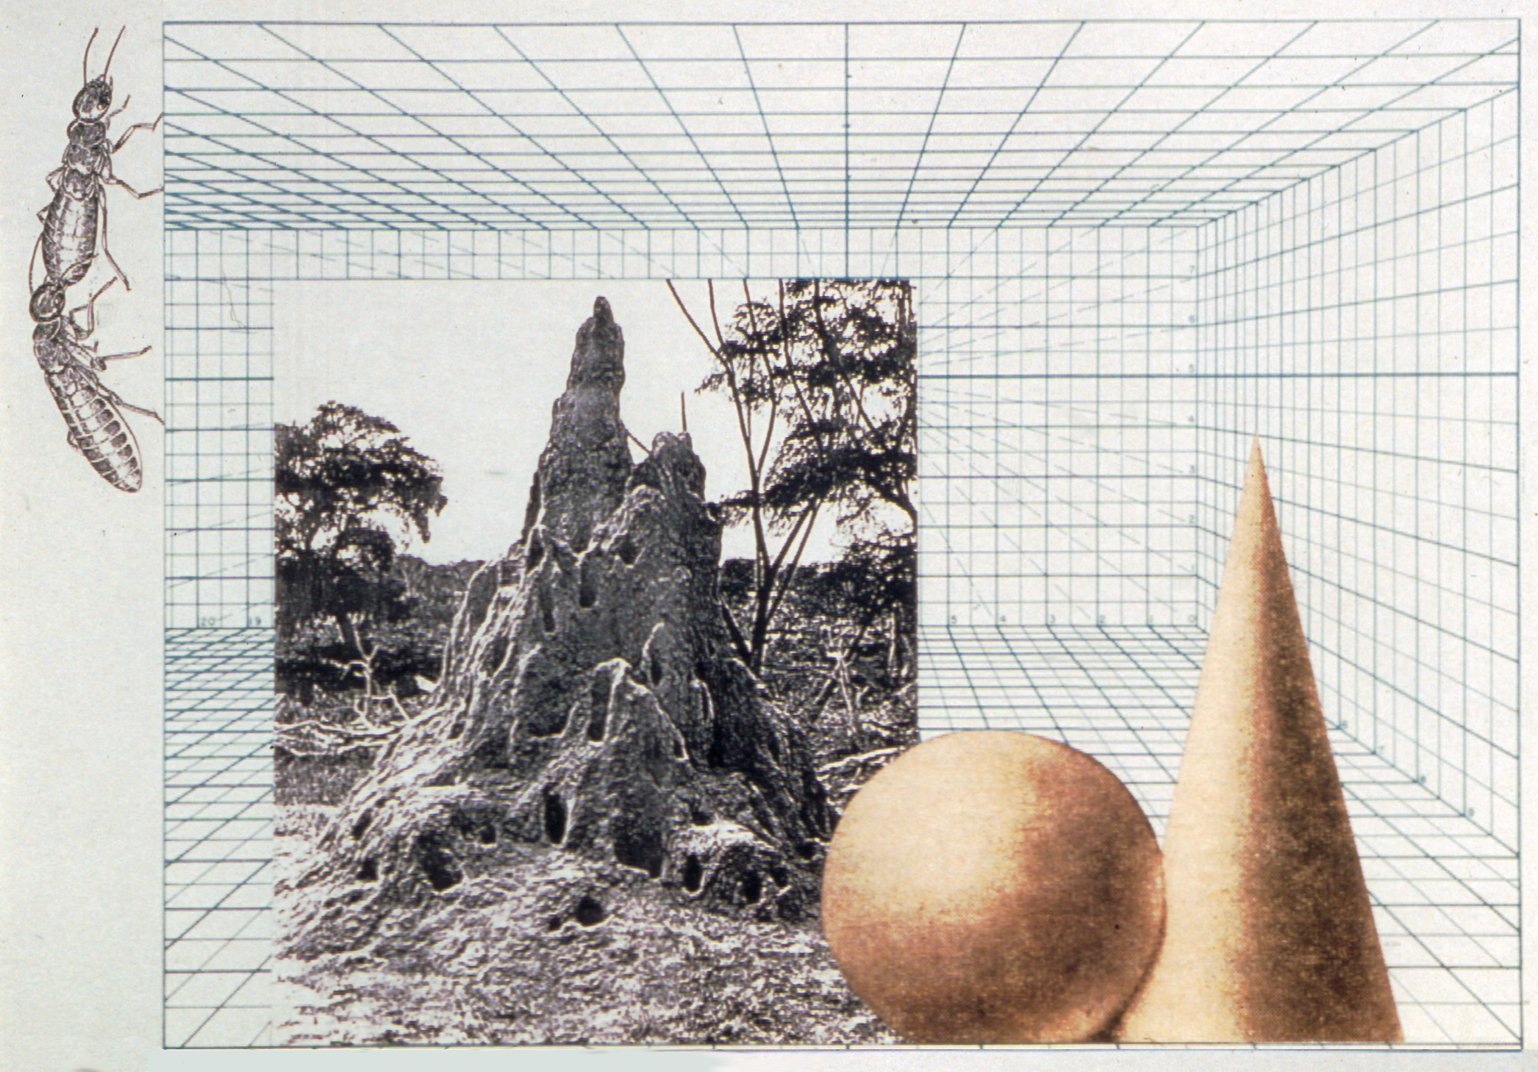  Komar &amp; Melamid,  Architectural Fantasies , 1998, from the series  Collaborations with Animals , computer print collages, 11 x 17 inches each. Courtesy of the former Komar &amp; Melamid Art Studio Archive. 